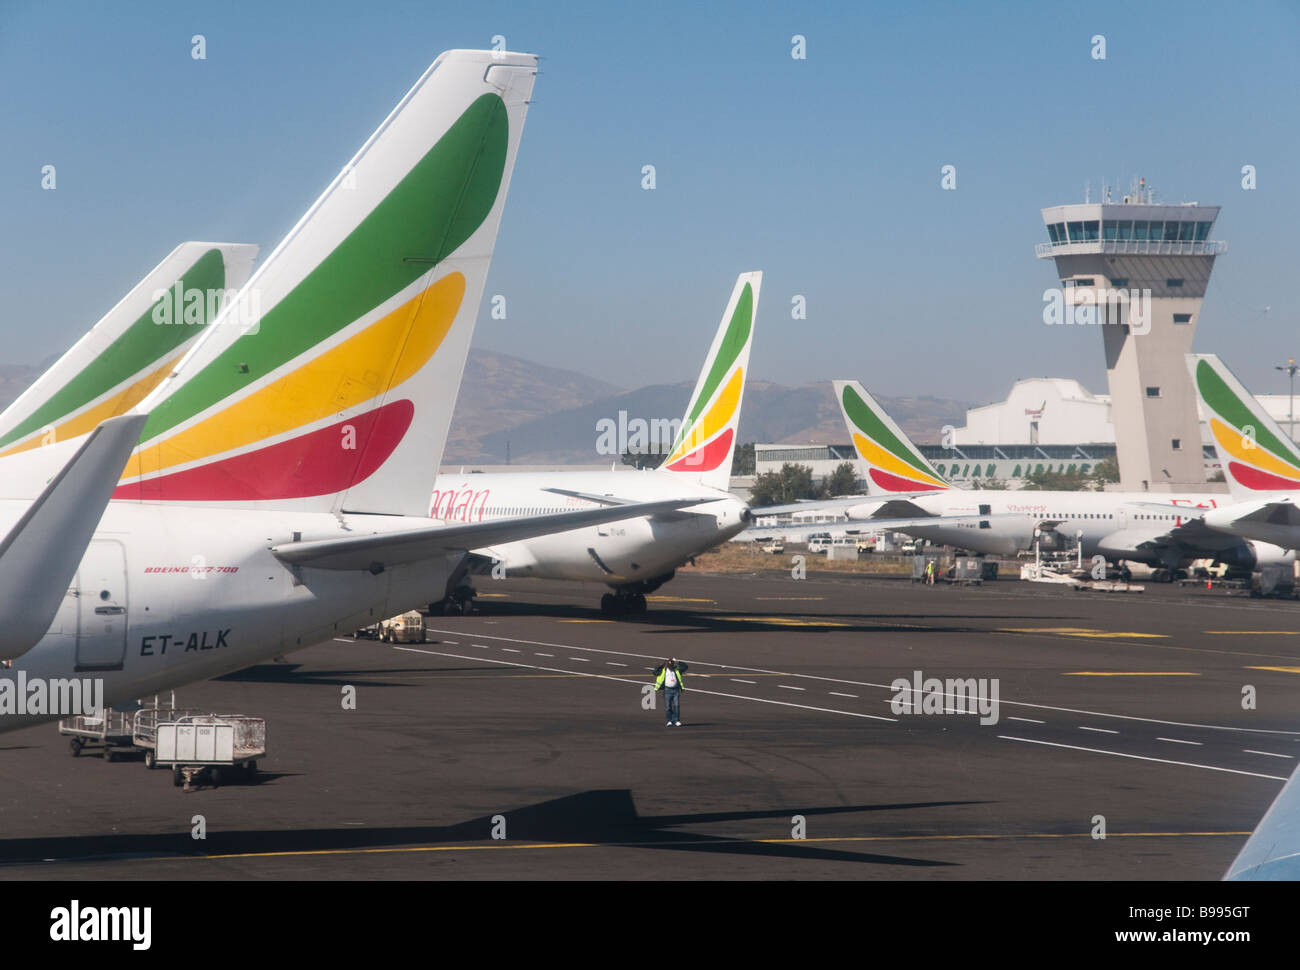 East Africa Ethiopia Addis Abeba International airport Ethiopian airlines planes with control tower in bkgd Stock Photo